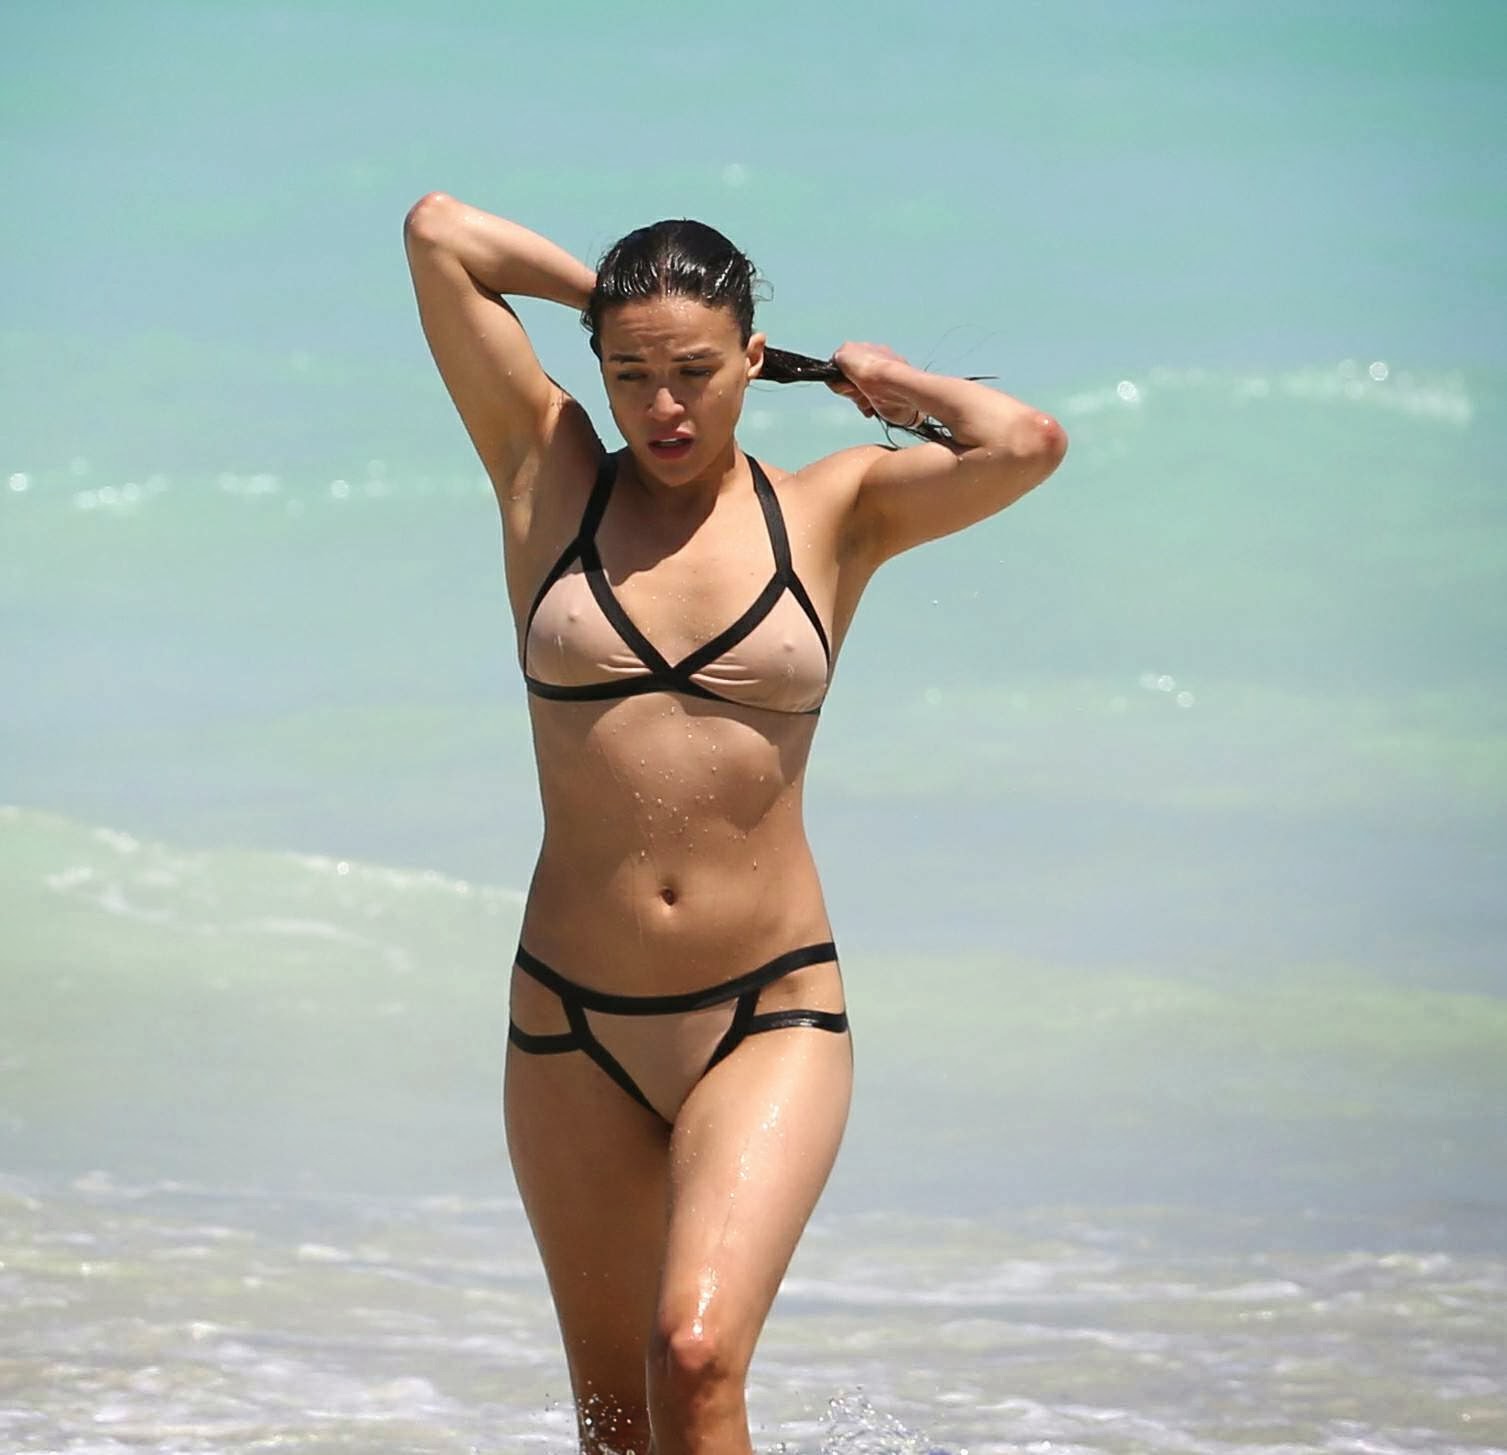 Actress Michelle Rodriguez Showing Off Her Bikini Body.